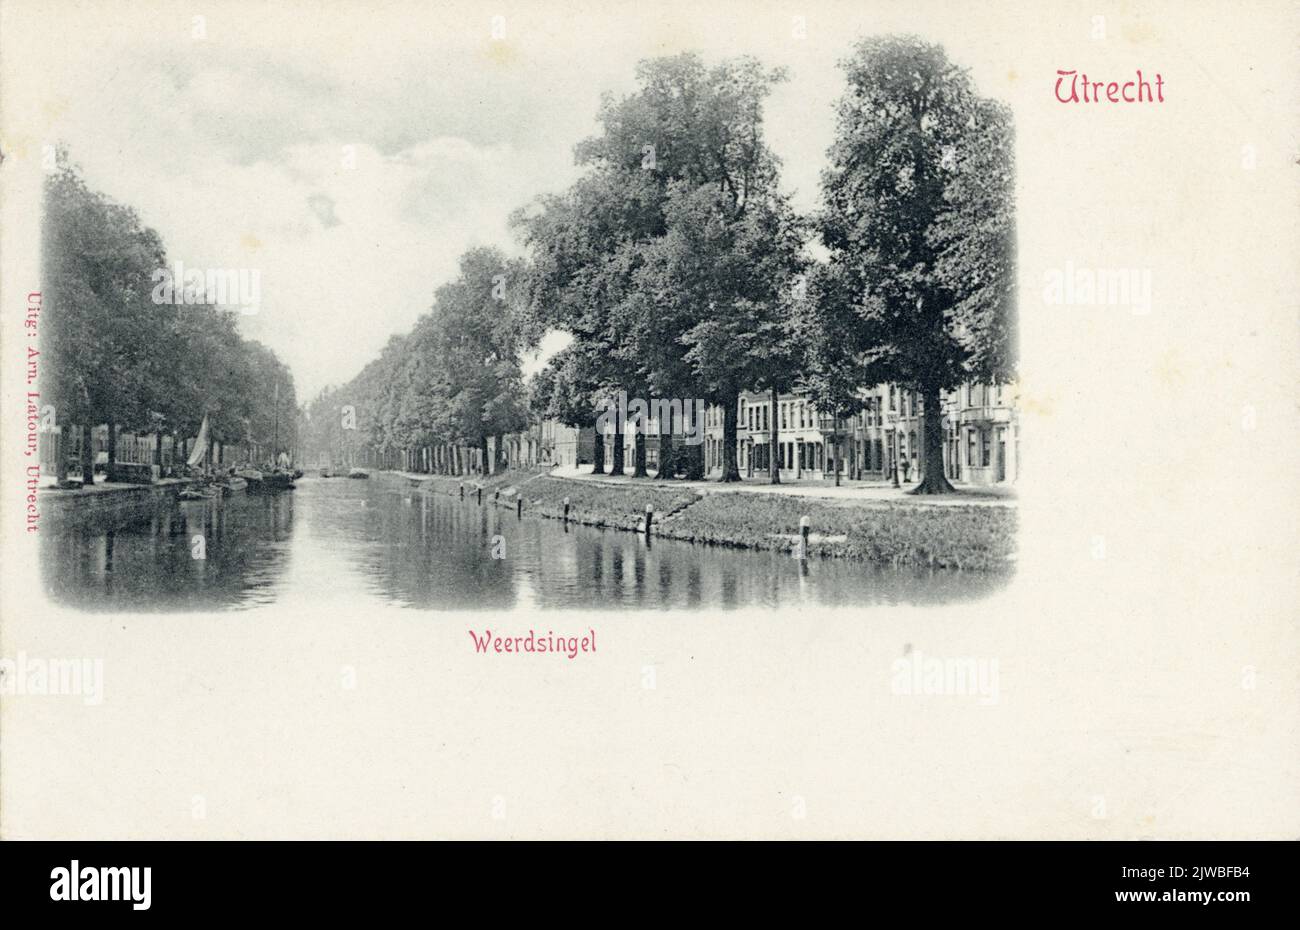 View of the Stadsbuitengracht in Utrecht with the Nieuwekade on the left and on the right the Weerdsingel W.Z. Stock Photo